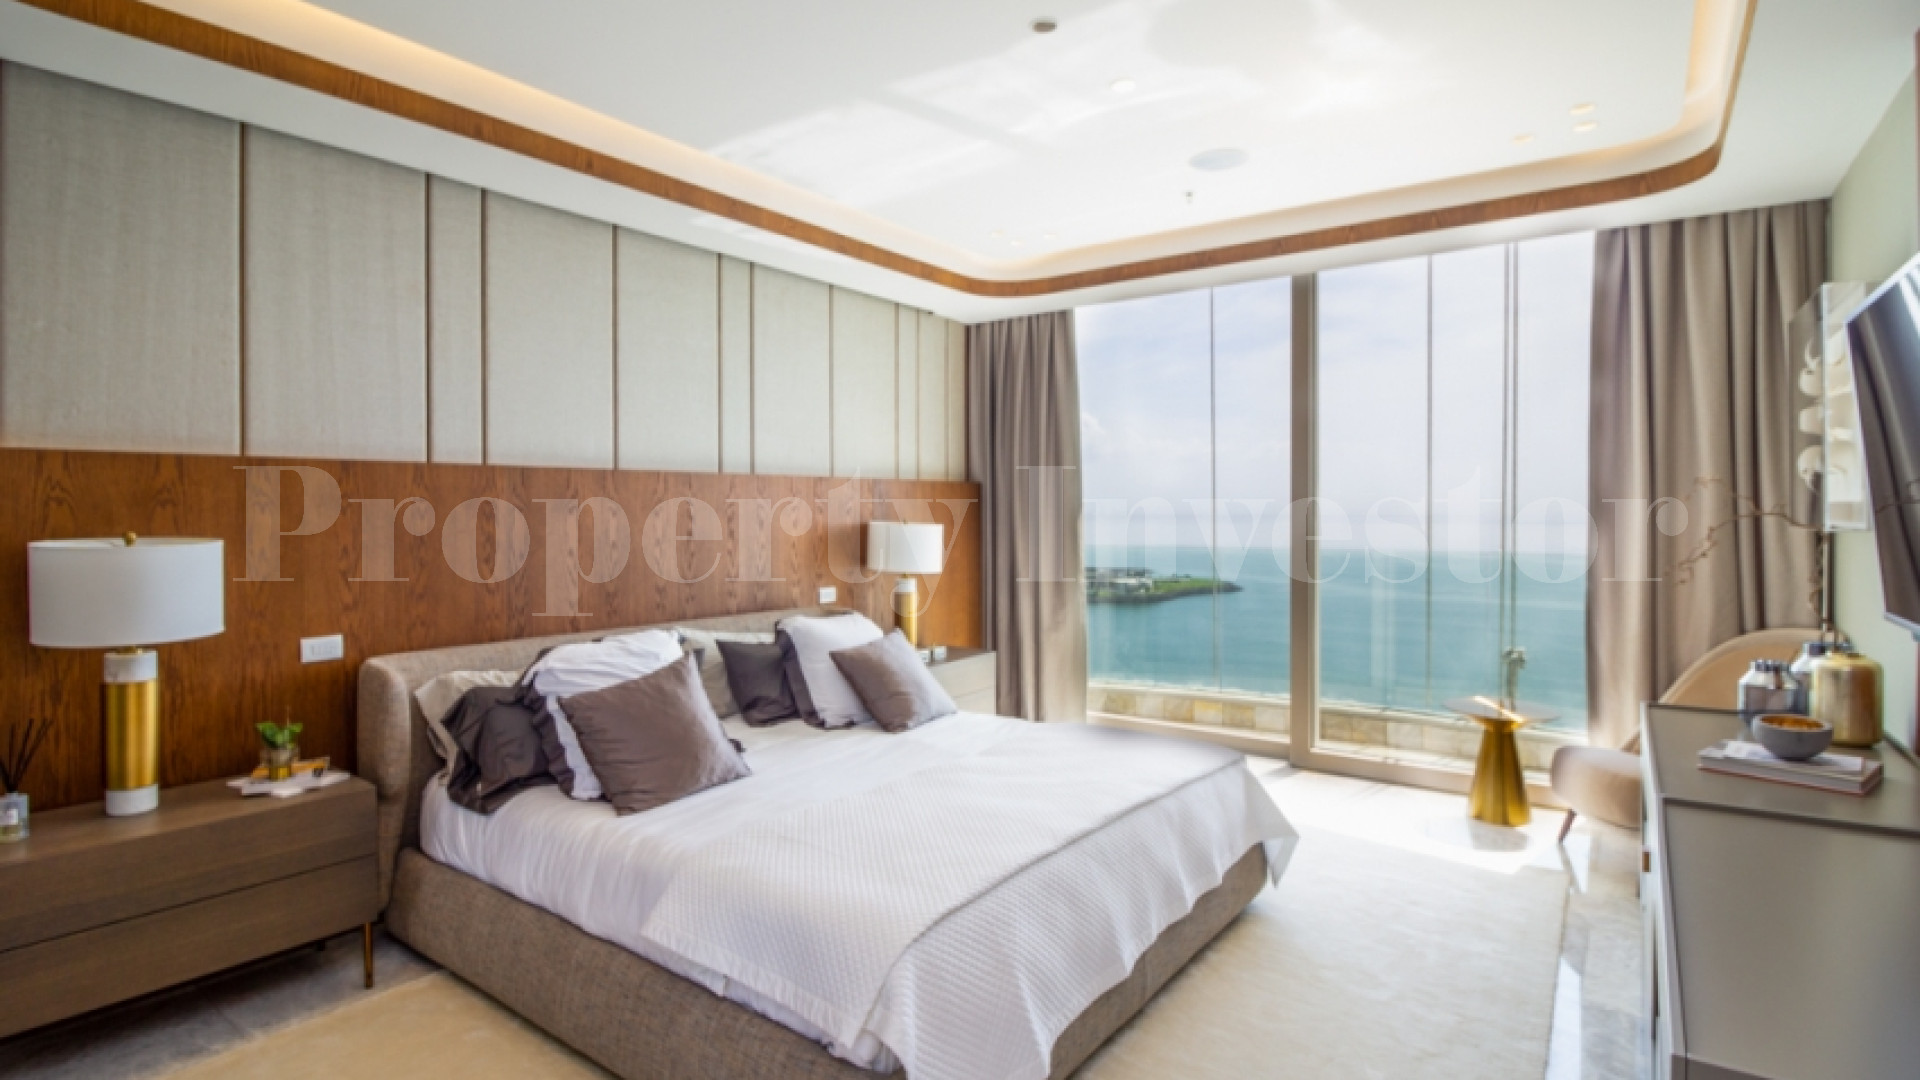 Spectacular 3 Bedroom Luxury Designer Apartment with Incredible Ocean Views for Sale in Panama City, Panama